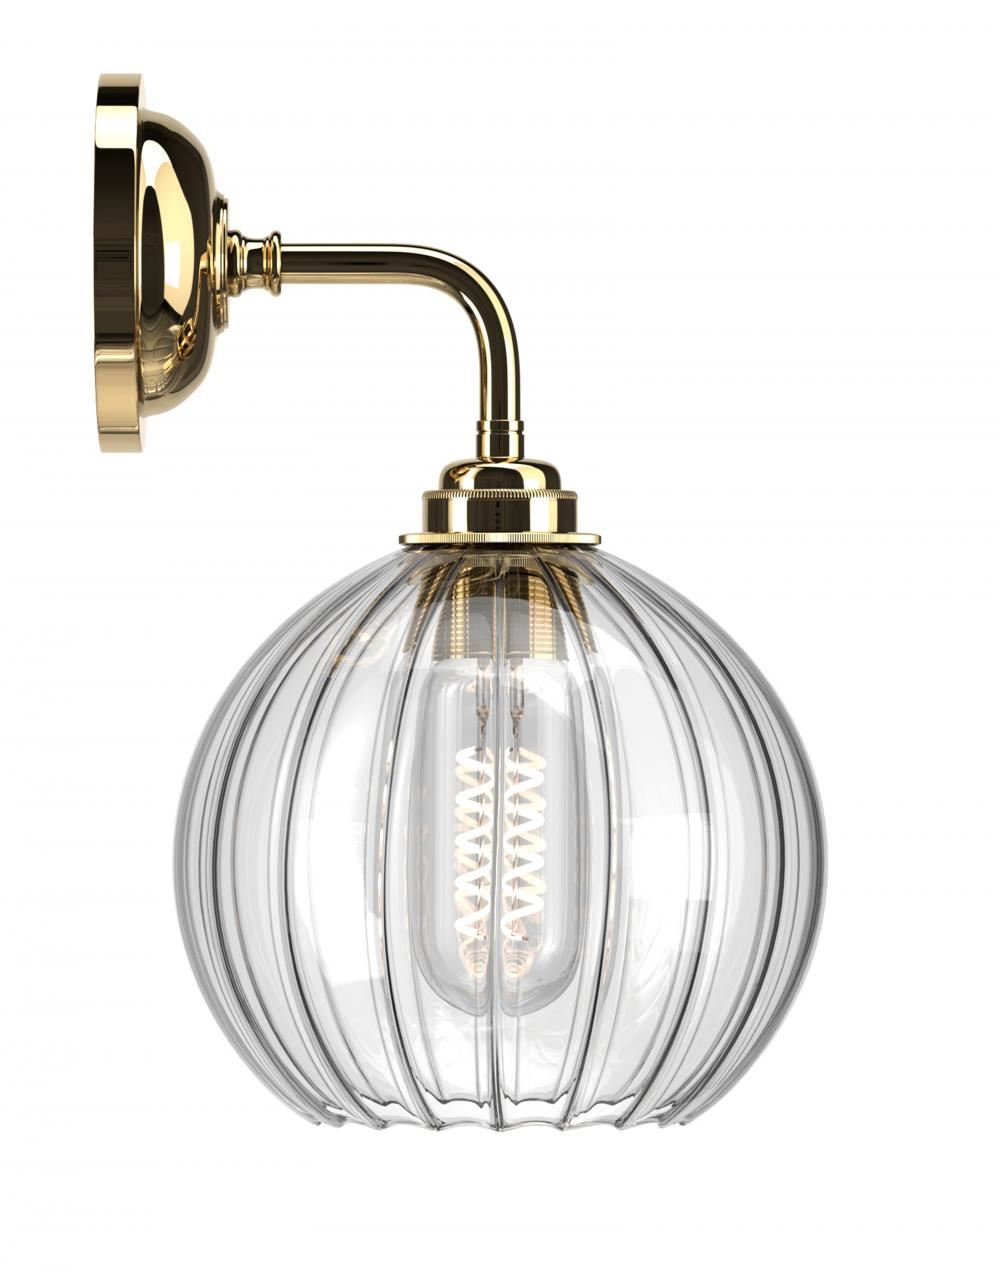 Hereford Globe Wall Light Ribbed Polished Brass